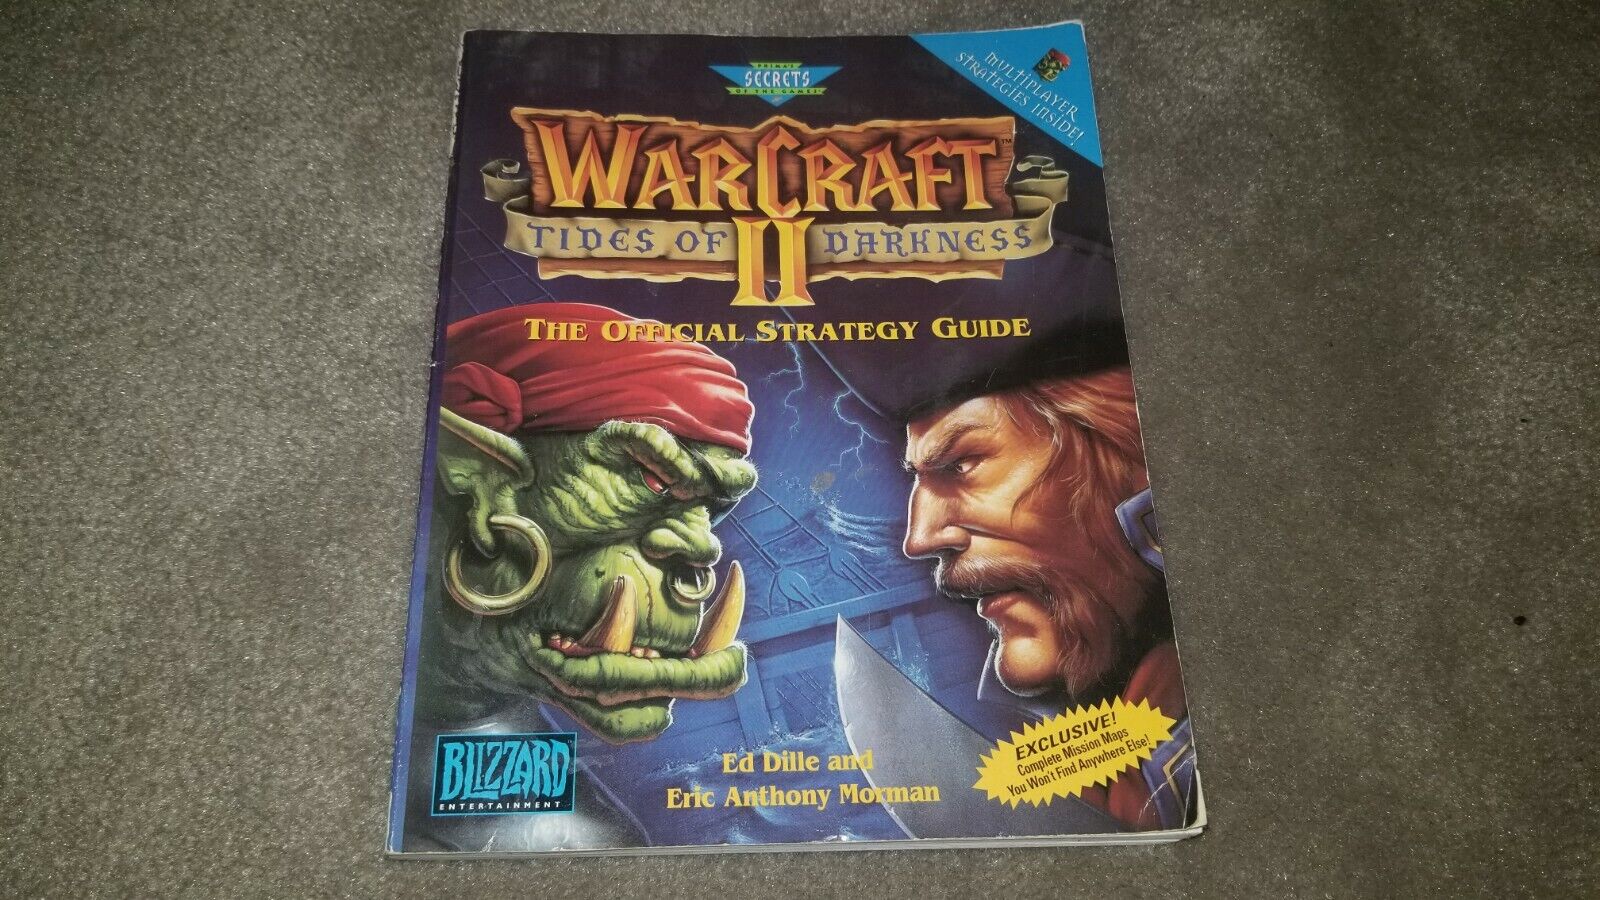 Vintage 1996 WarCraft II, Tides of Darkness computer game manual, 238 pages